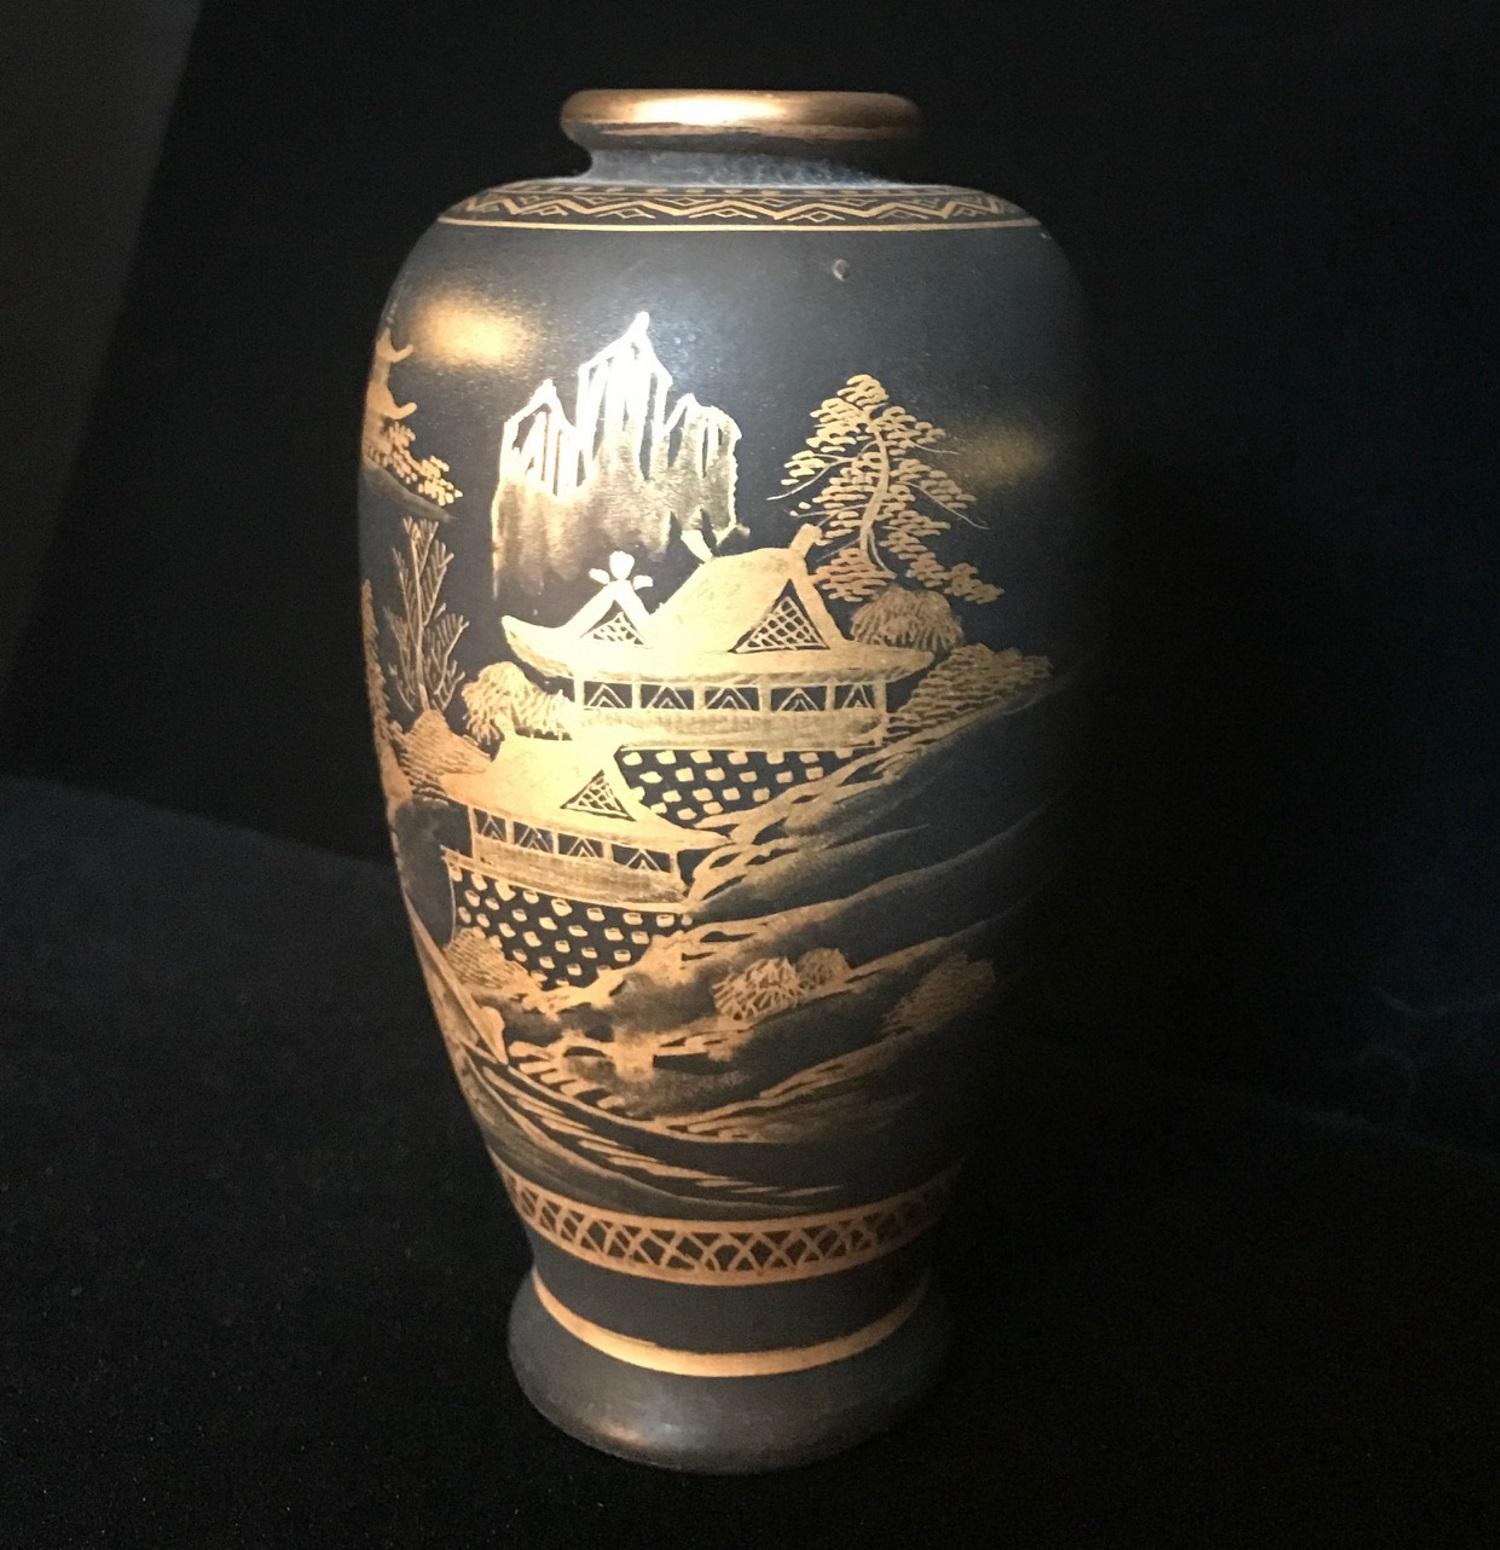 This is an extremely rare miniature Japanese Satsuma miniature vase from the Meiji Period (1868-1911). It is superbly decorated with a finely detailed Japanese landscape in gold on black background. The vase is signed on the base.

Satsuma-ware